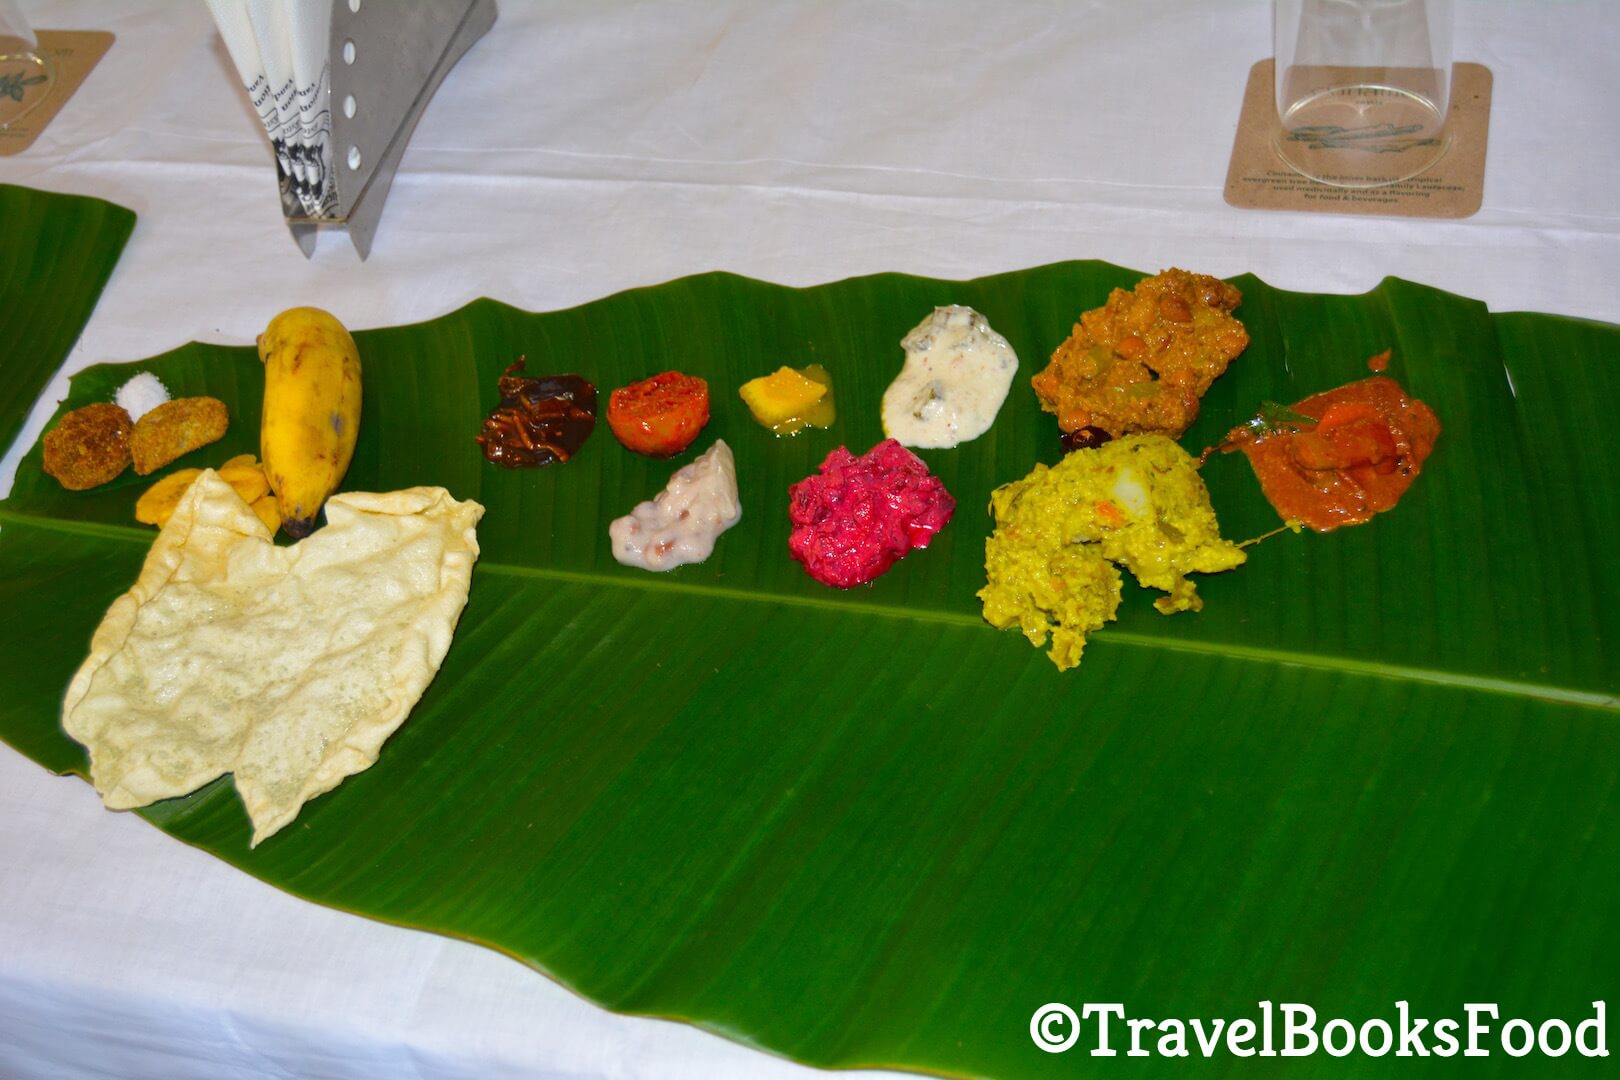 Photo of a traditional Kerala Vegetarian Meal (Sadhya) served in a green plantain leaf. There are at least 12-14 types of foods in this photo.